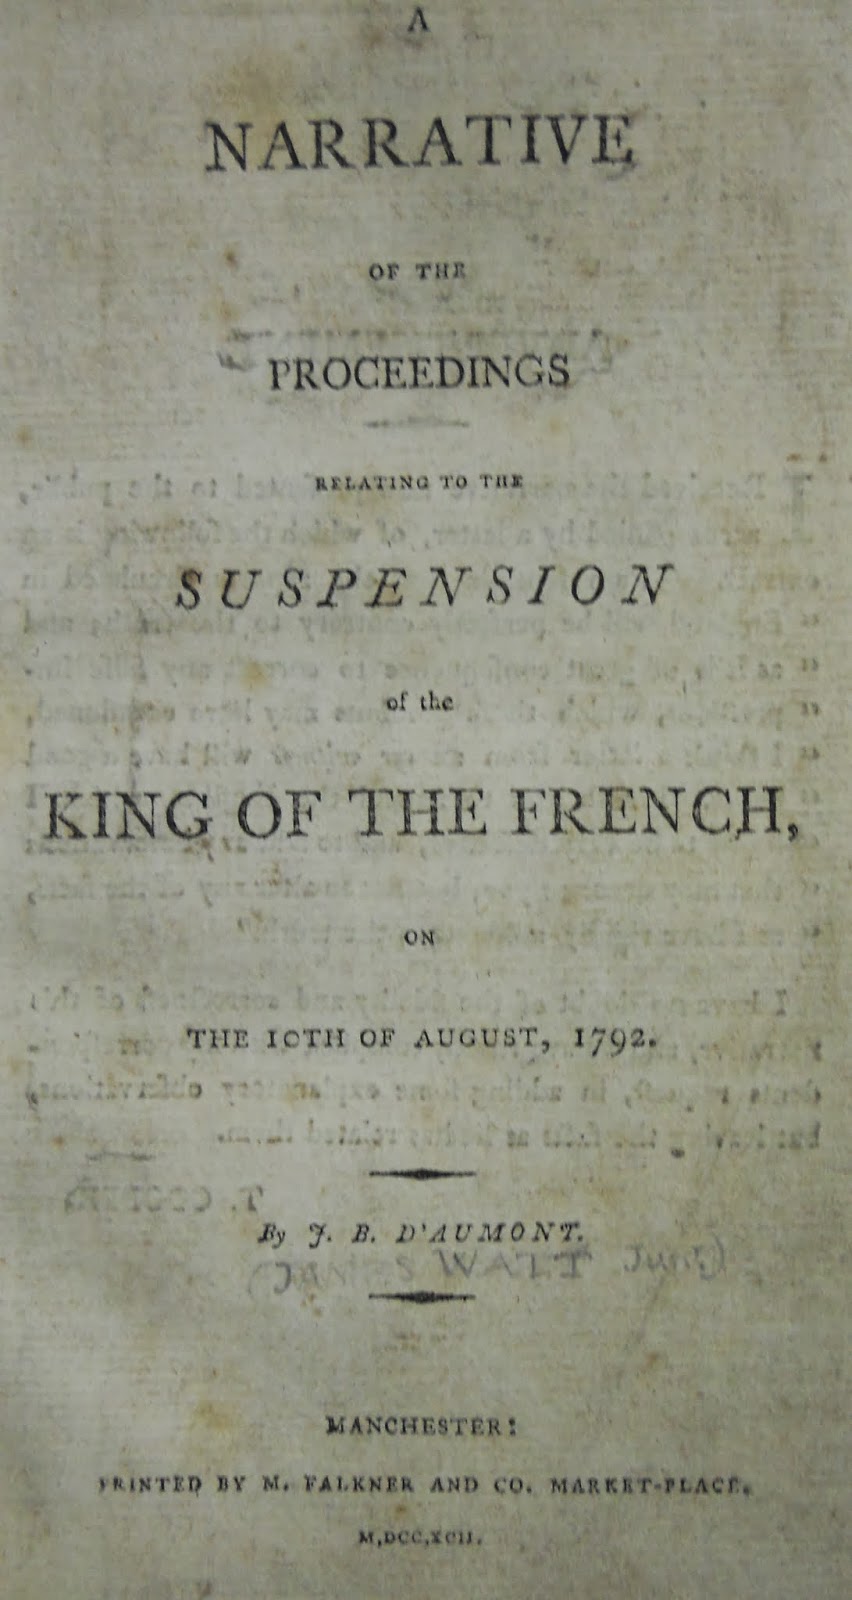 "Narrative of the Proceedings Relating to the Suspension of te King of the French"